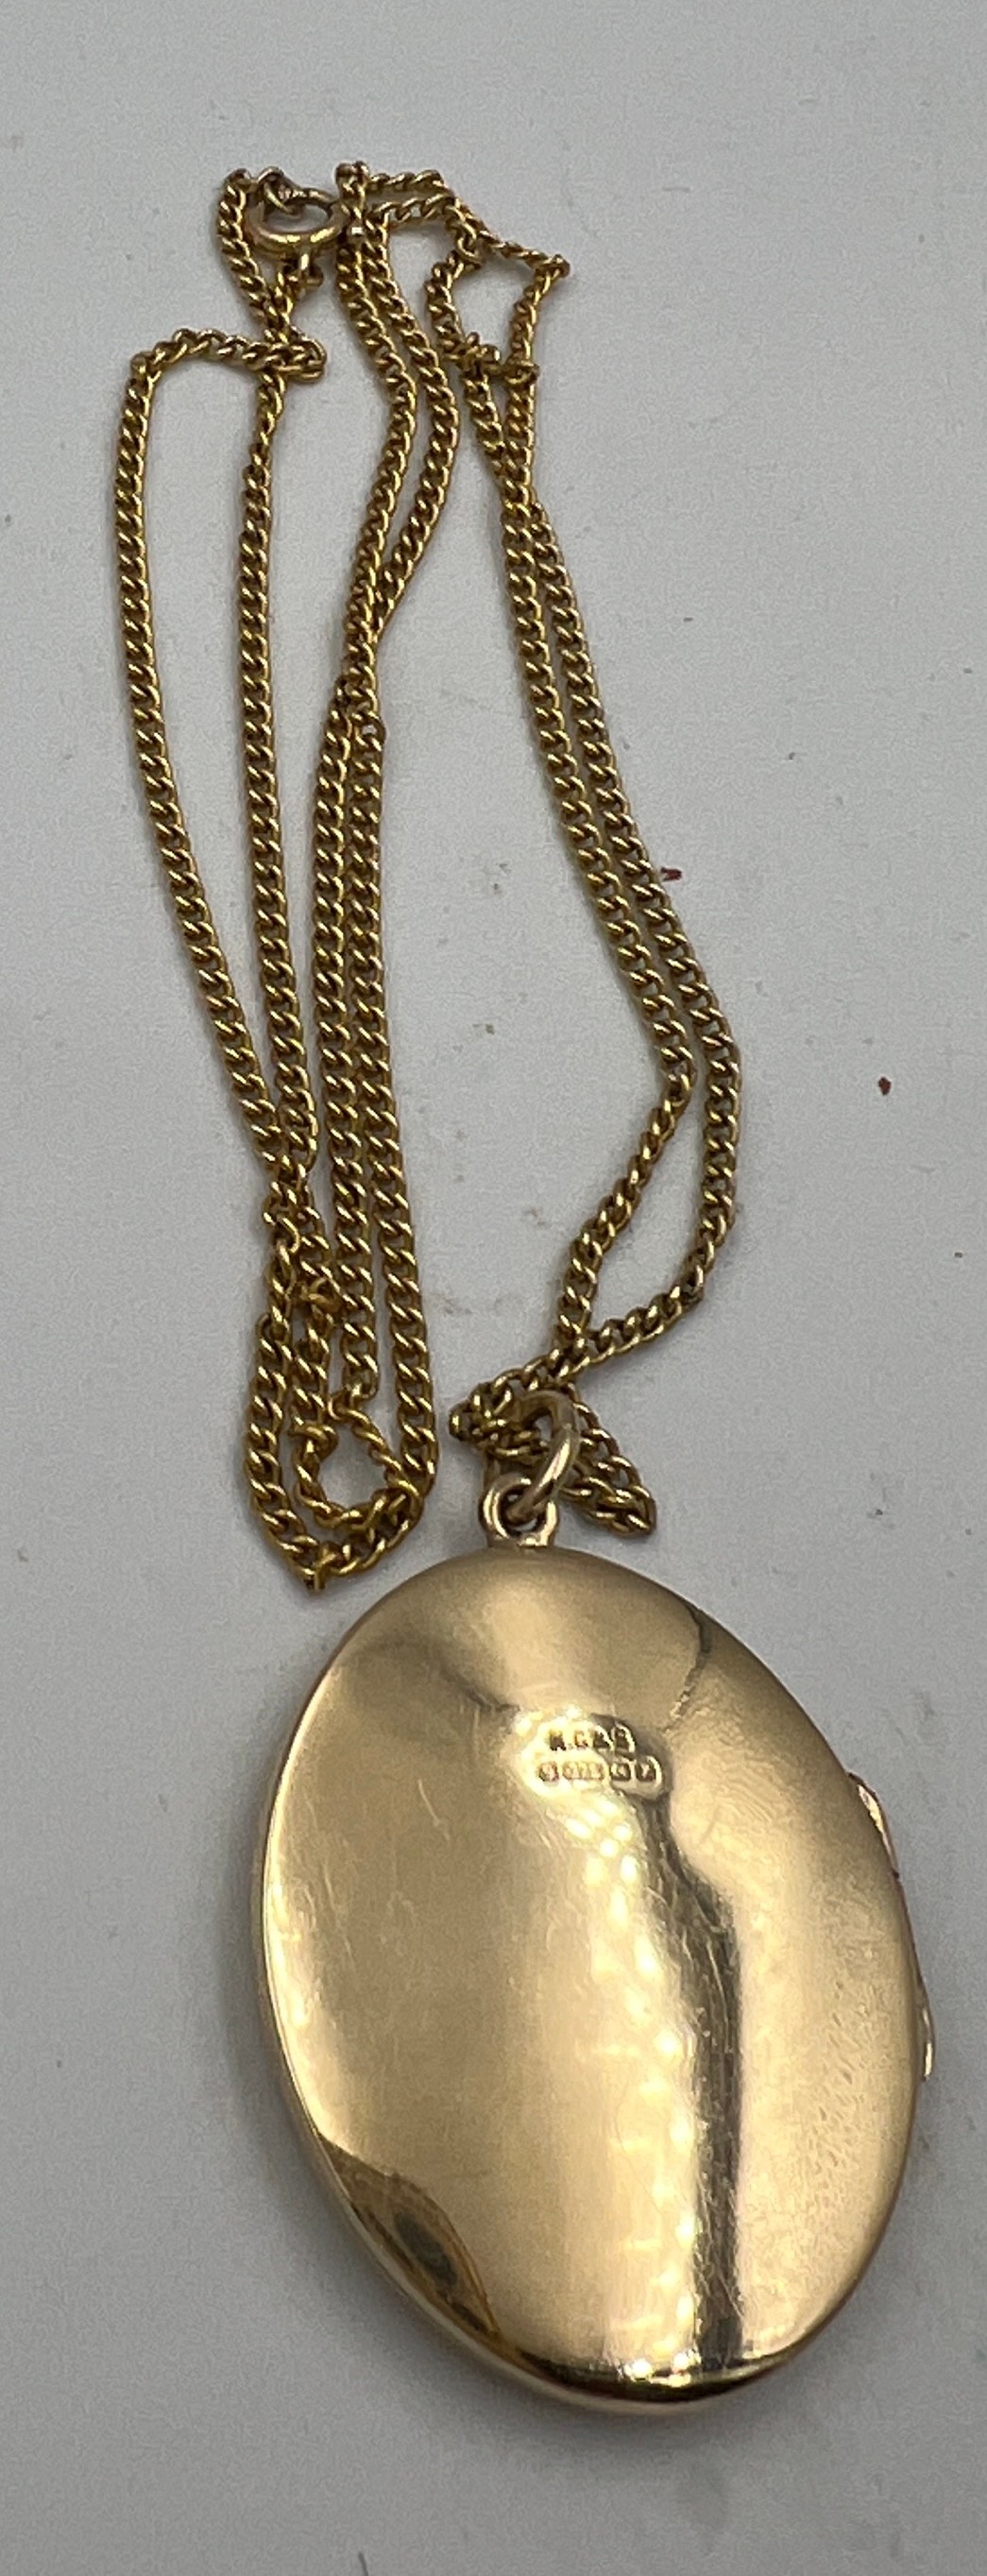 A nine carat gold oval locket and chain. Chain 54cm long. Locket 3cm x 2.5cm approximately. Weight - Image 2 of 3